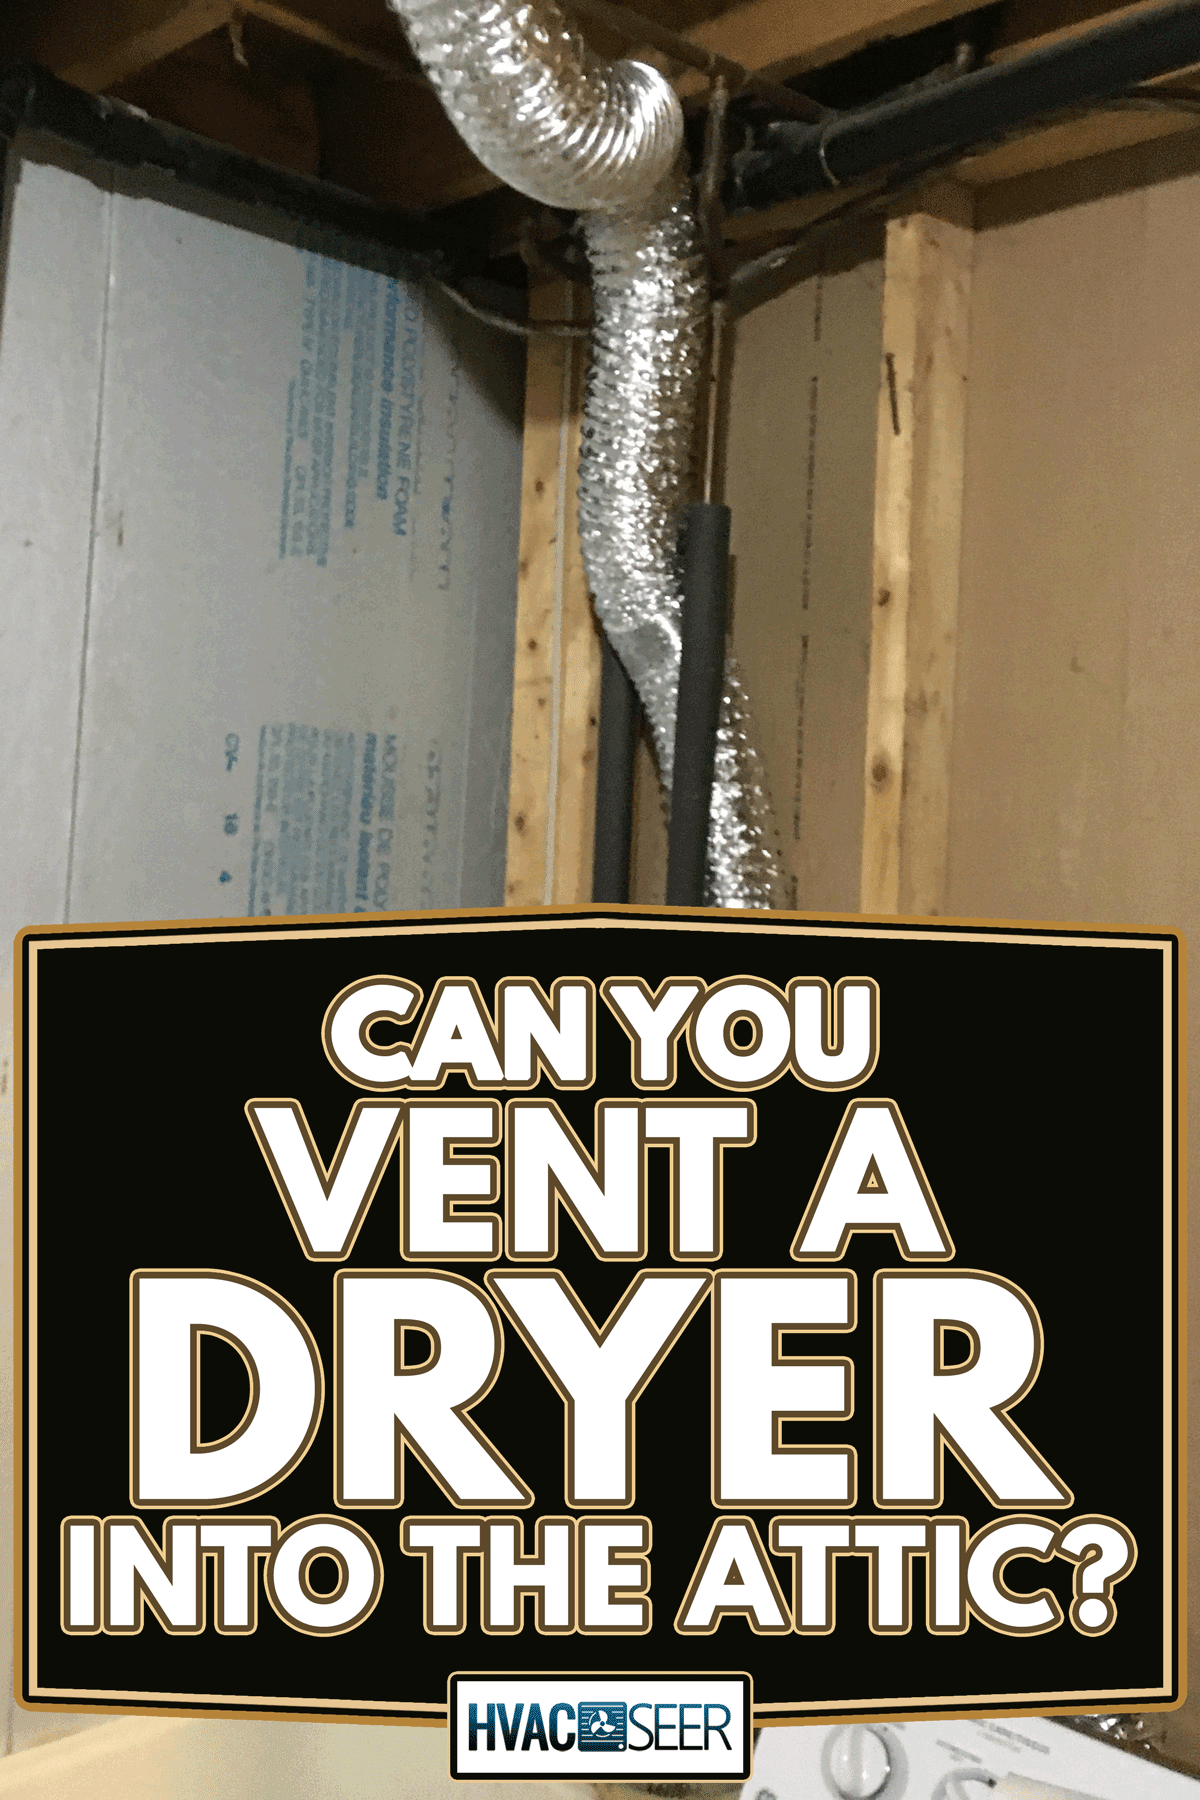 Household dryer ductwork, Can You Vent A Dryer Into The Attic?